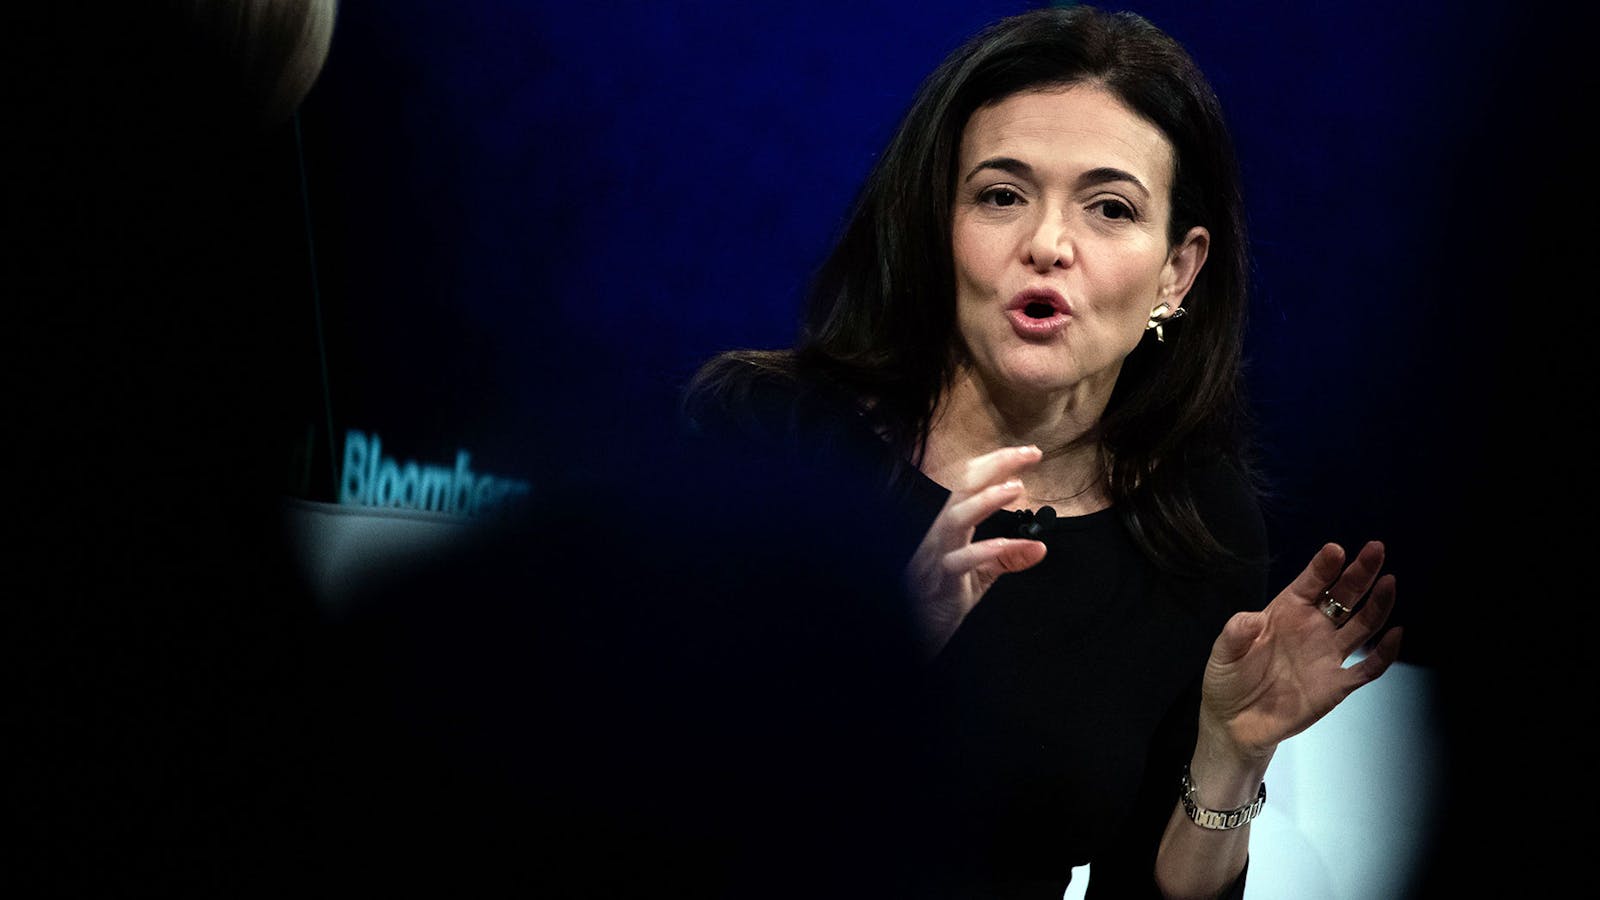 Sheryl Sandberg, chief operating officer of Facebook. Her portfolio includes Facebook's ad business. Photo by Bloomberg.